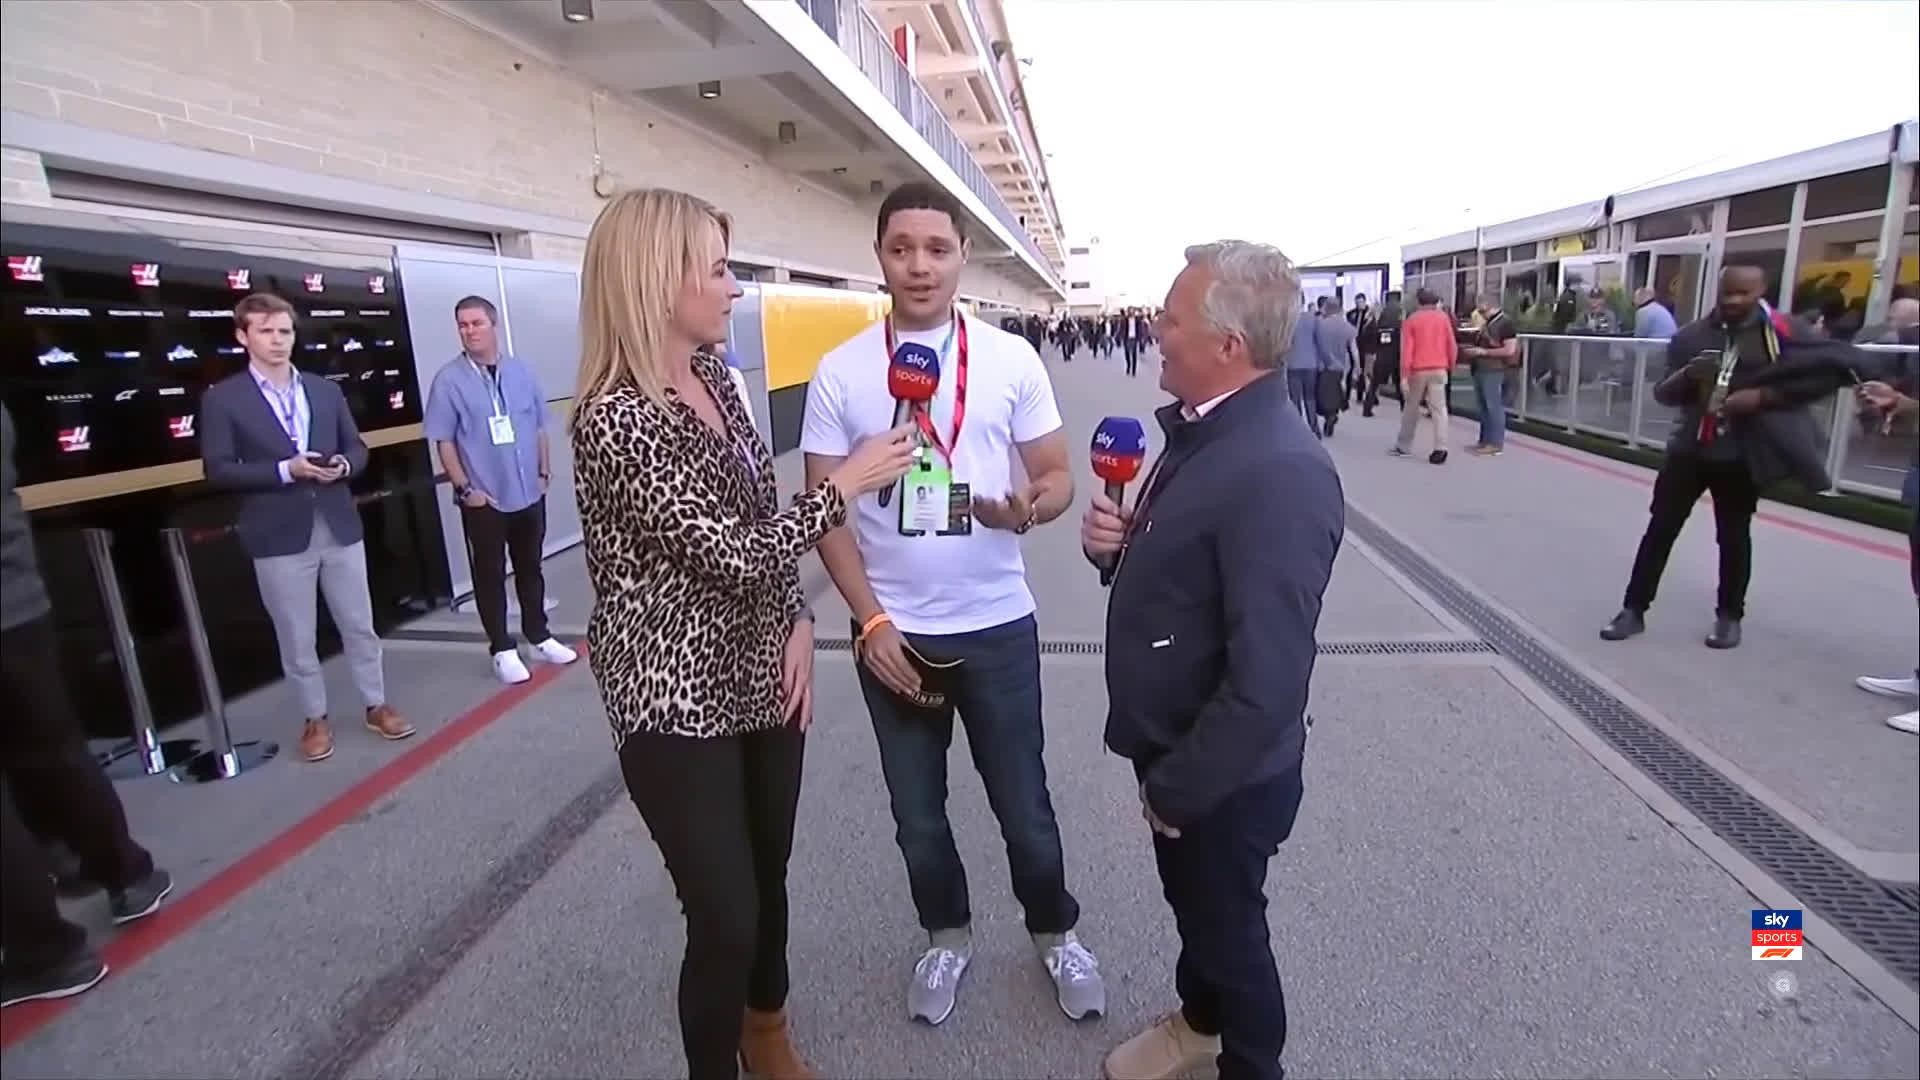 Trevor Noah interview with Sky F1 before qualifying United States Grand Prix 2019 r/formula1